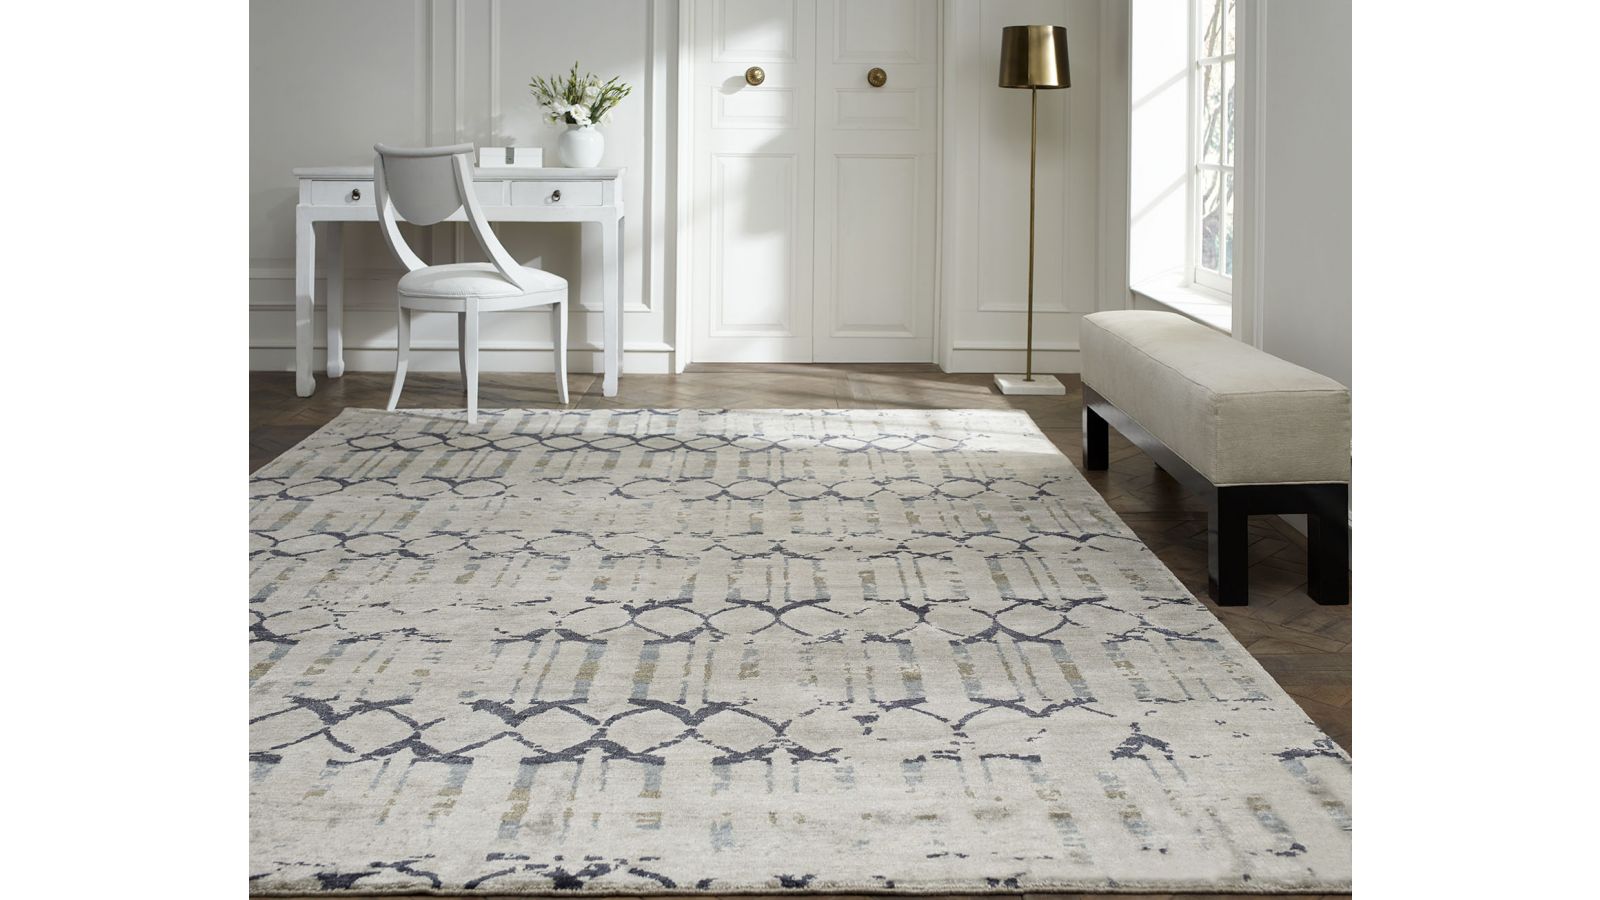 IN-948 by Kalaty Rug Corporation